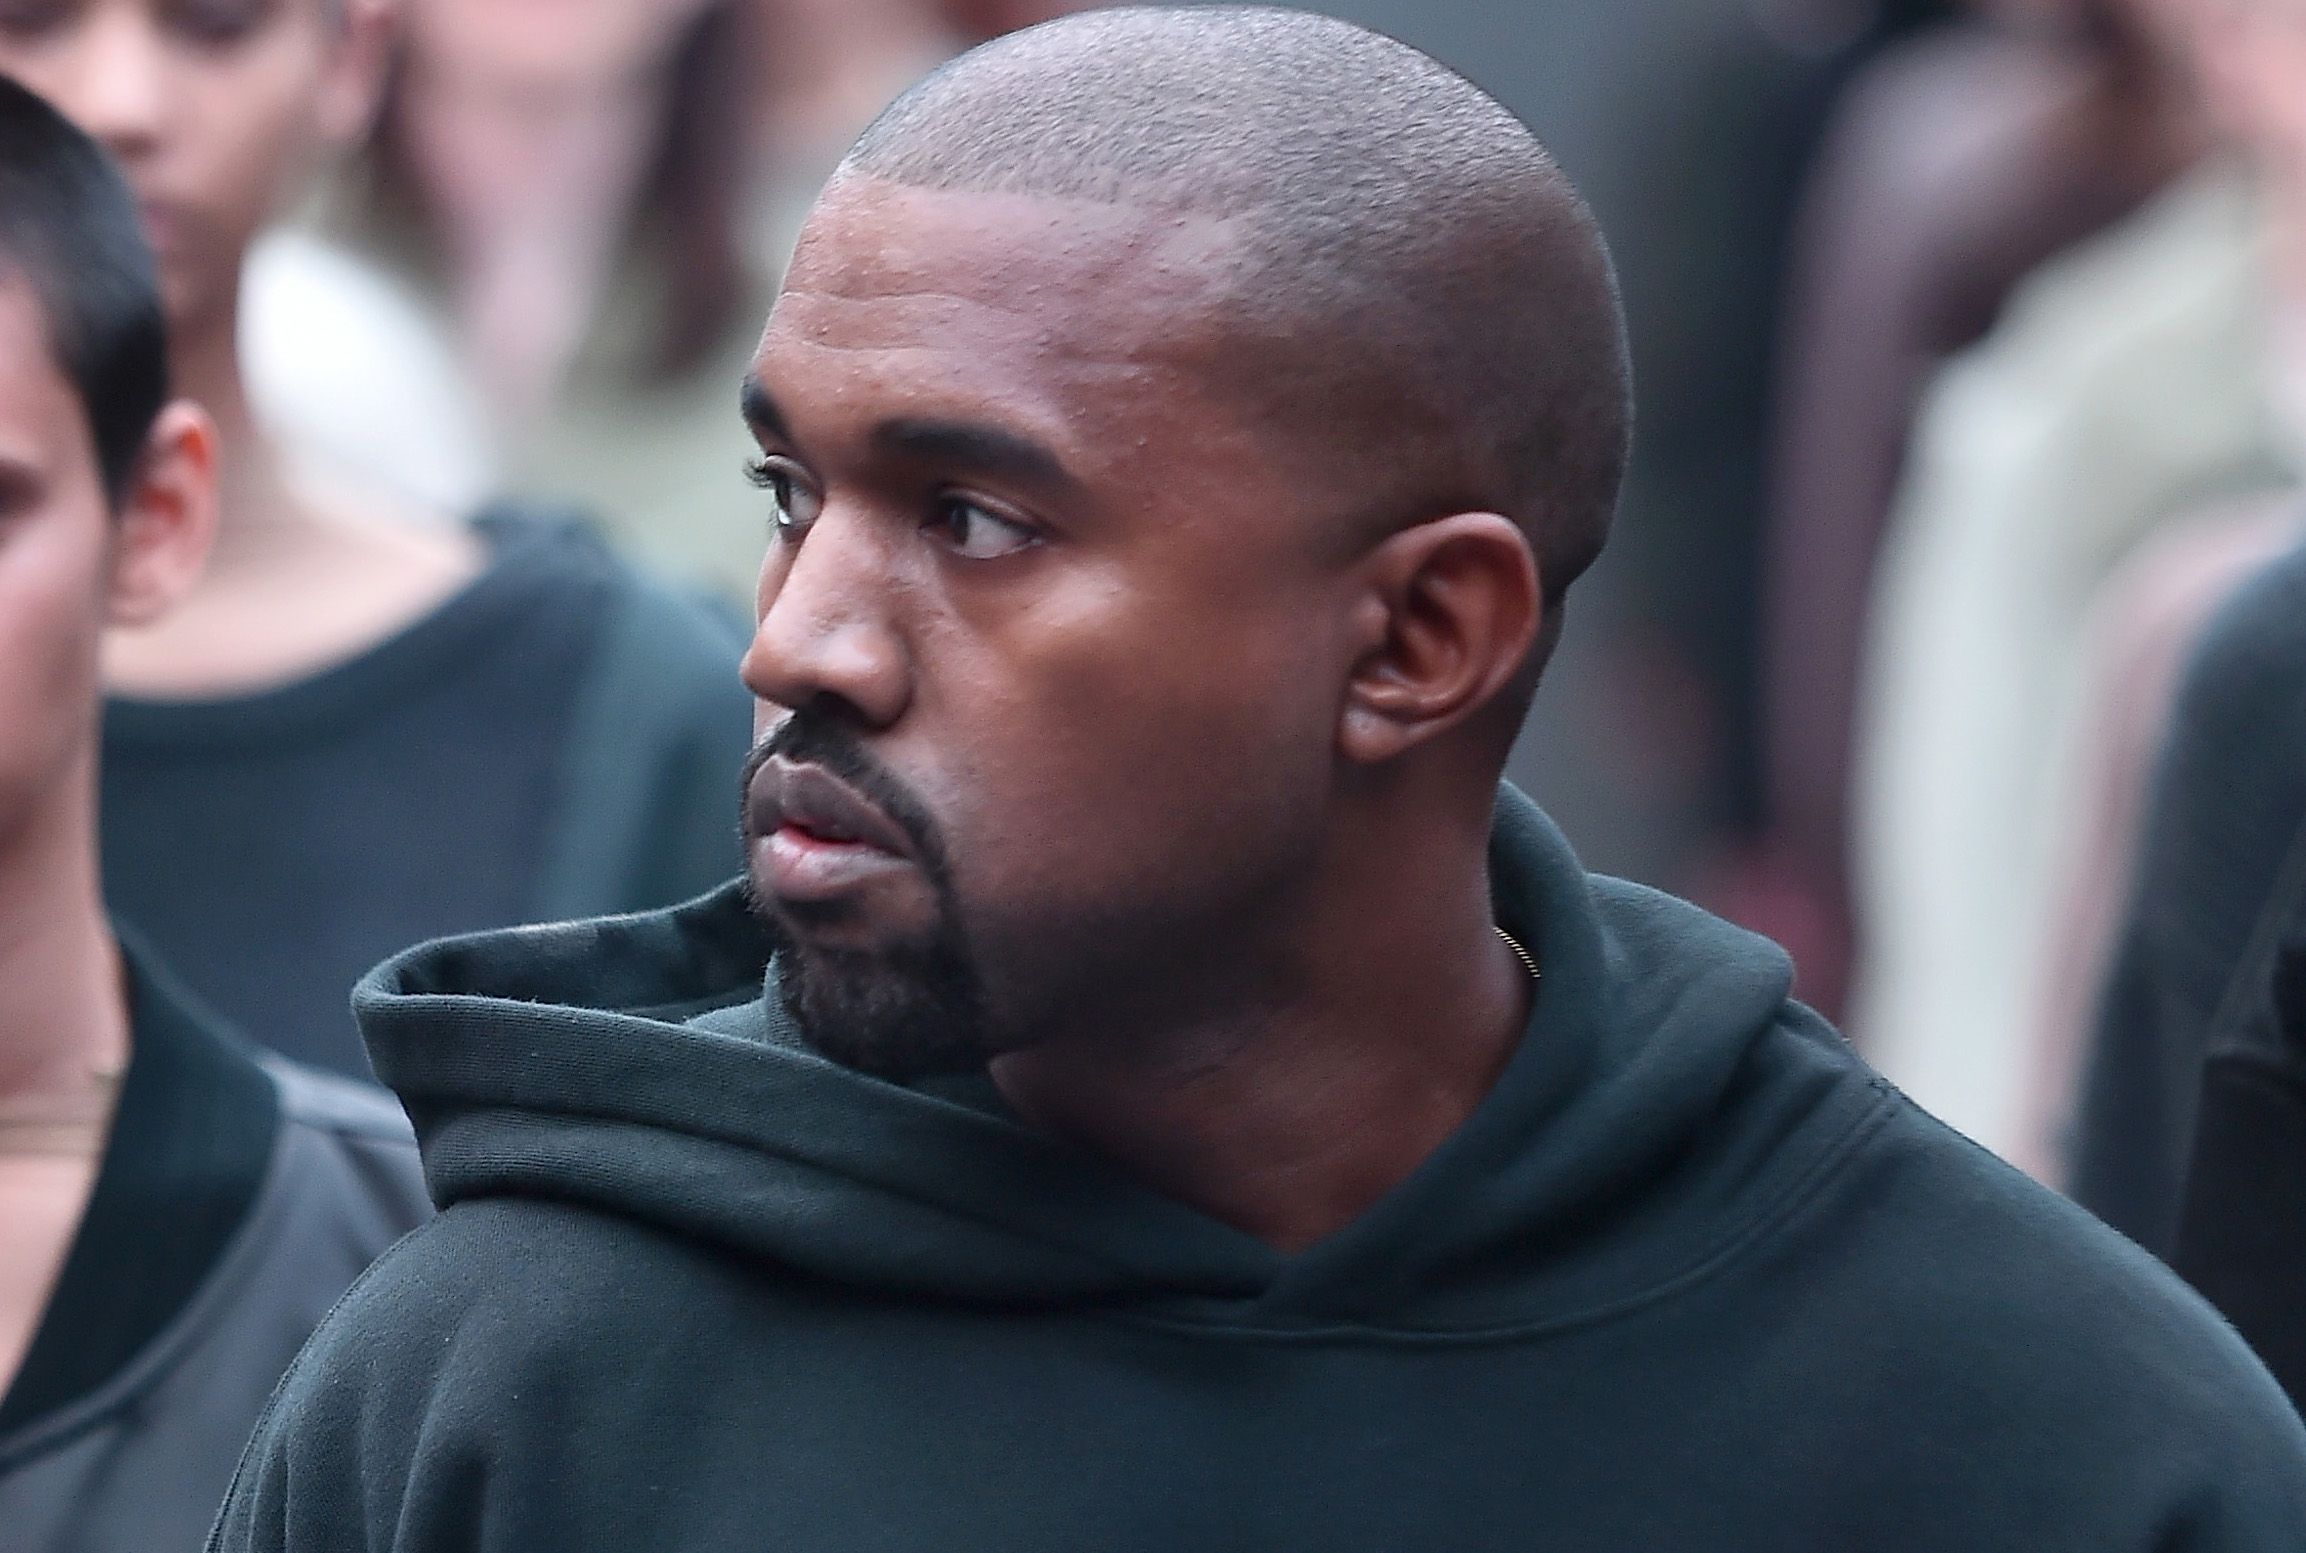 Documentary Uncovers The Rift Between Frenemies Kanye West And